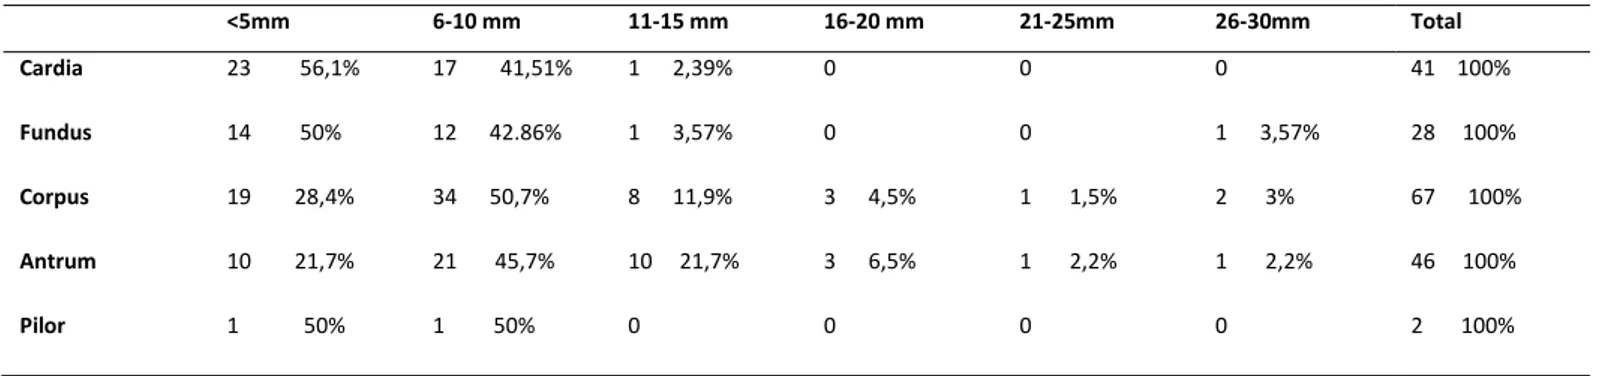 Table 3: Relationship between polyp size and anatomic location ; the values indicate number of cases and percentage